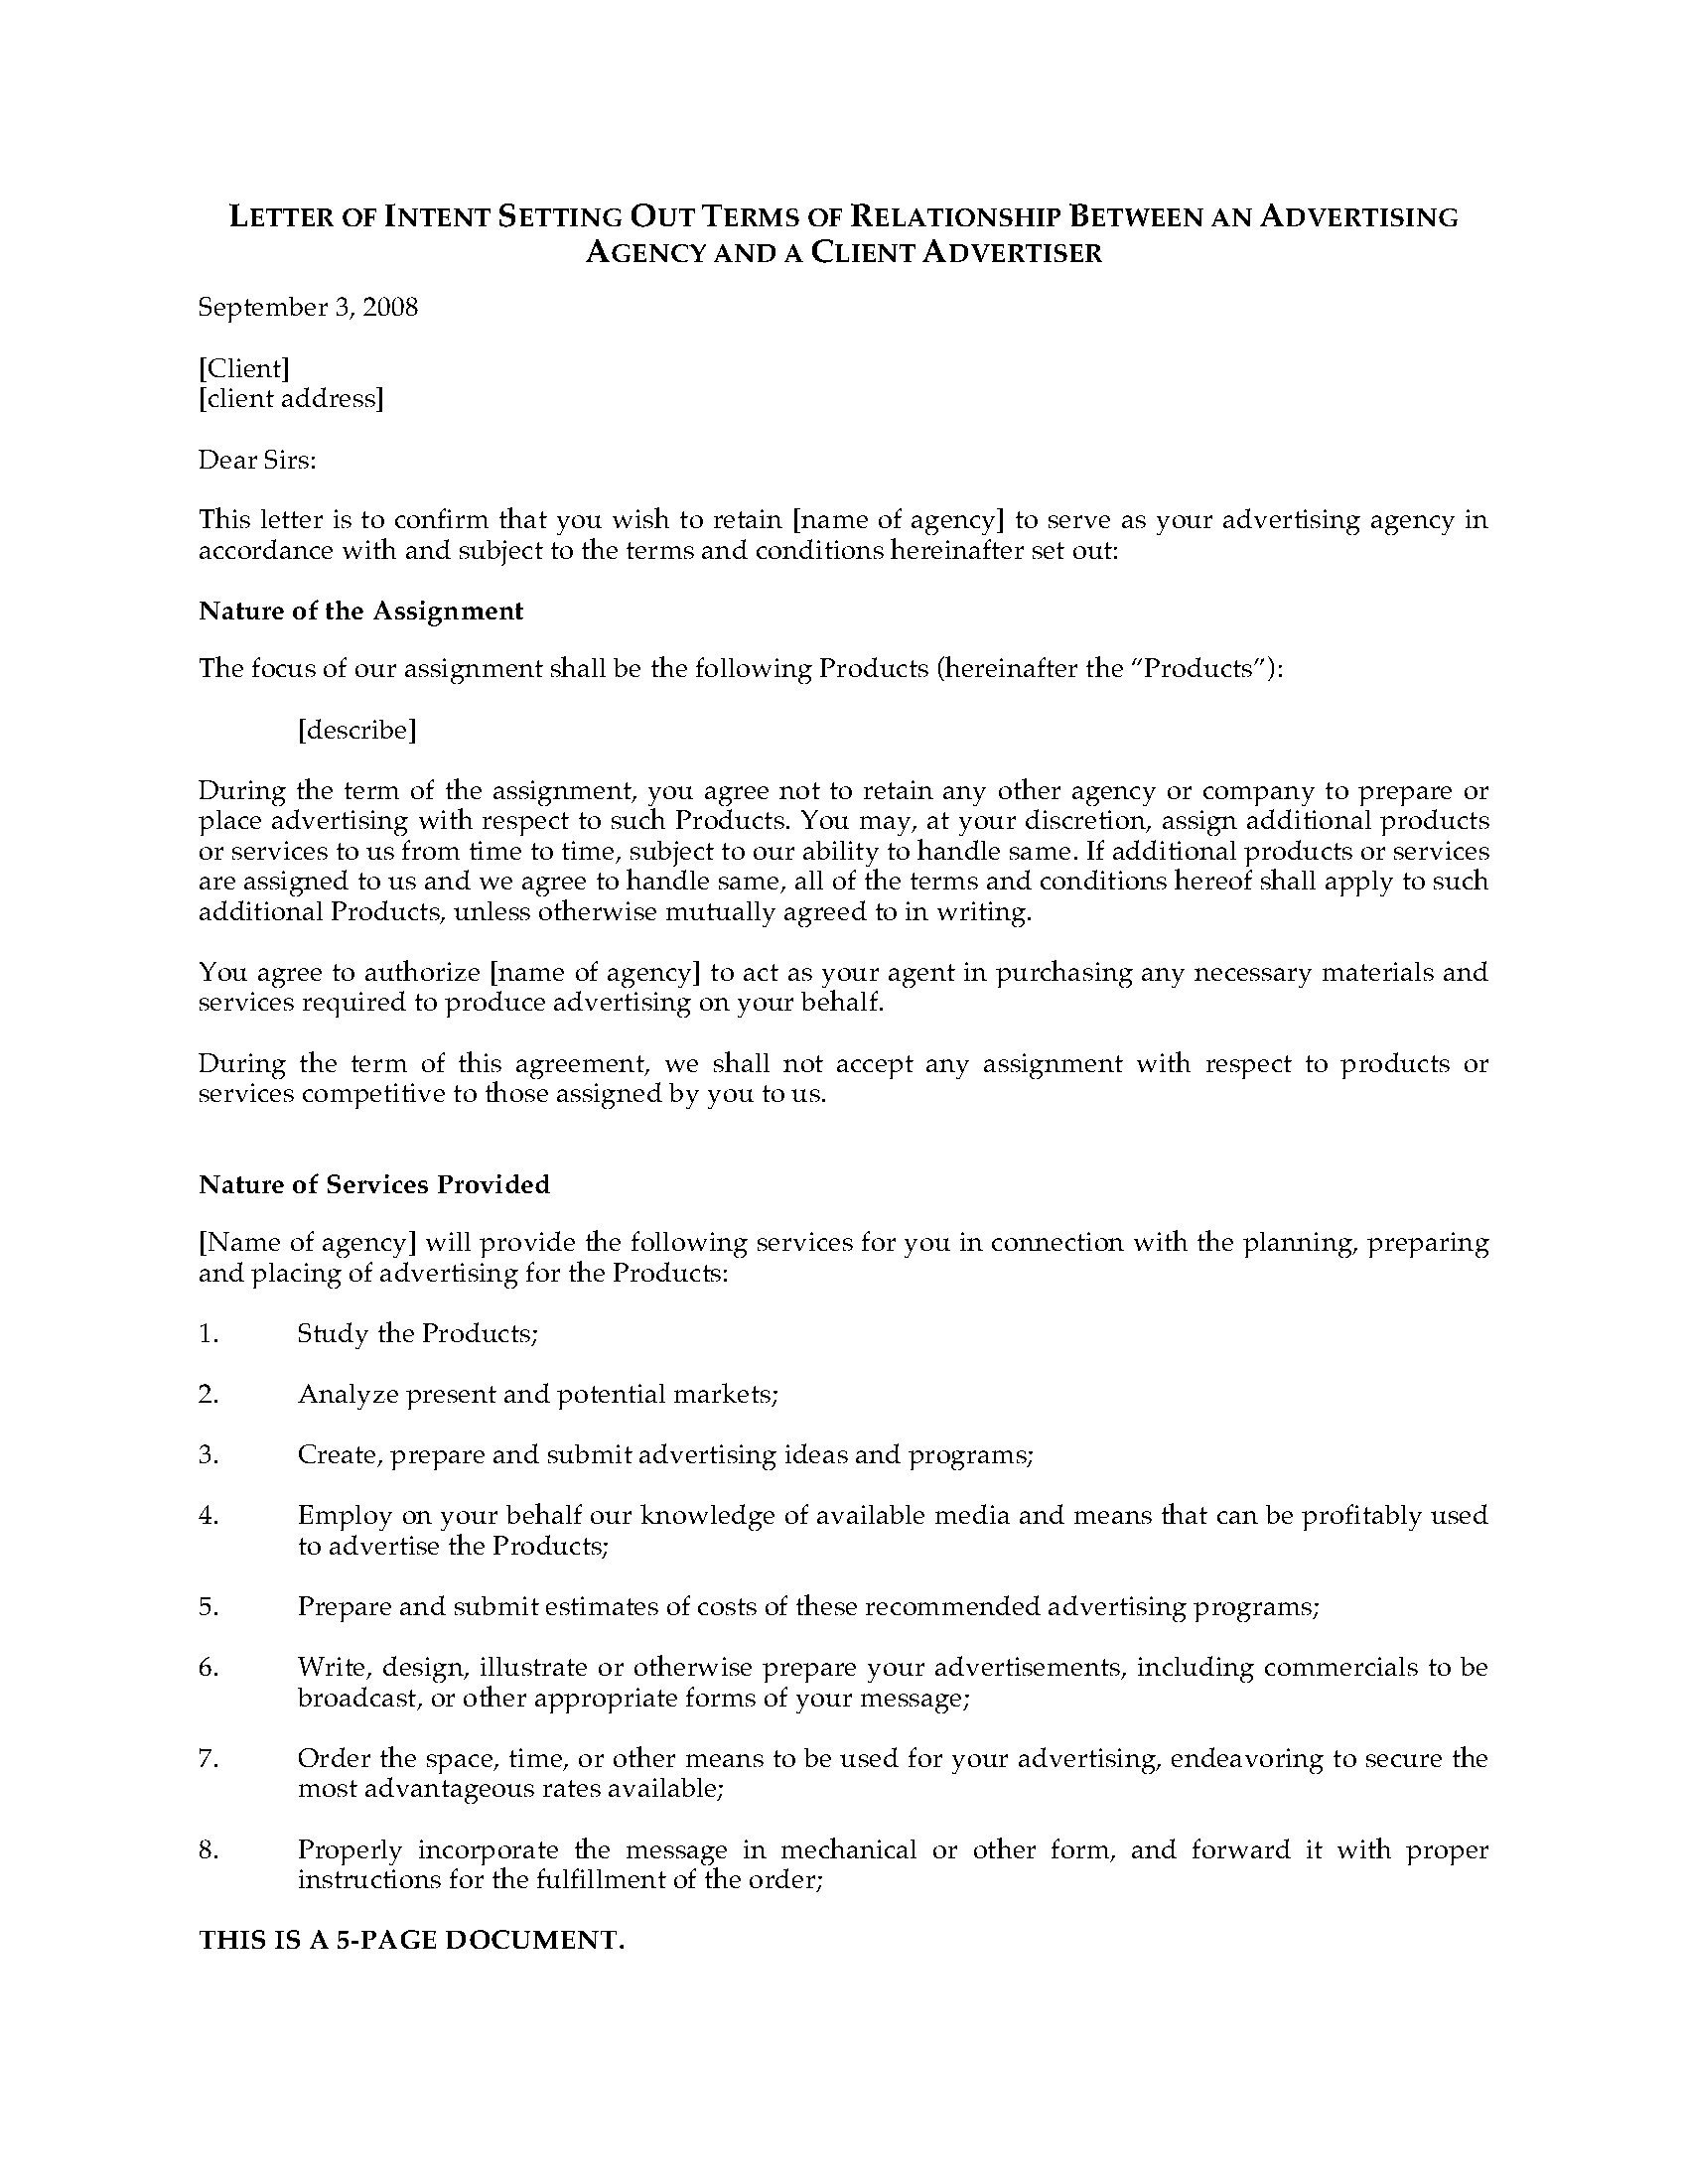 Letter of Intent to Hire Advertising Agency